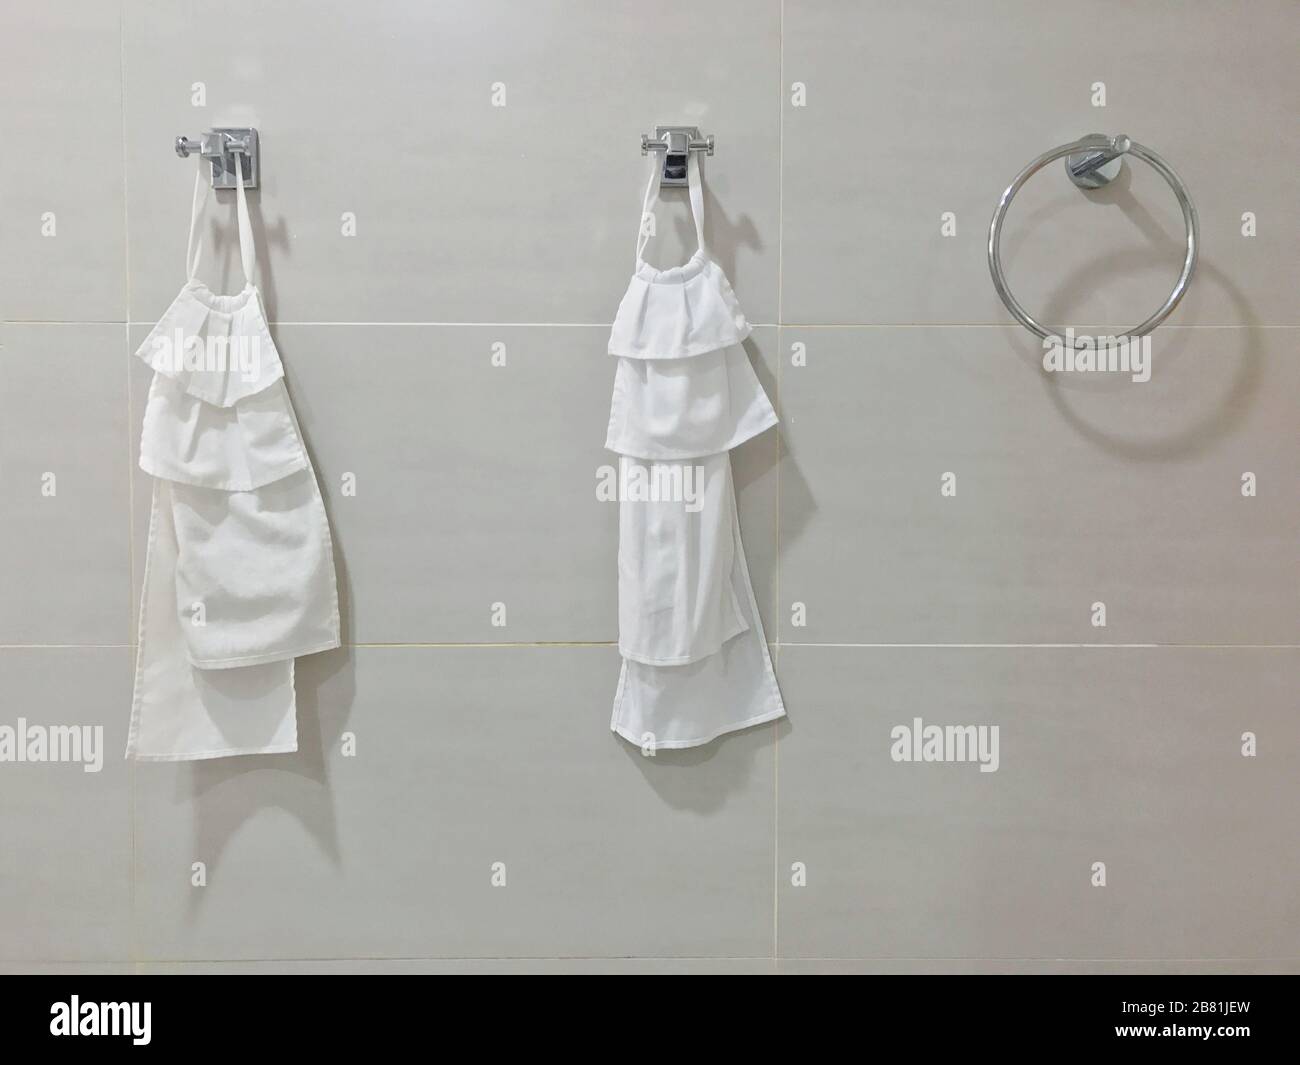 Towel rail Stainless white Hanging loop at Bathroom Wall modern, Cloth towels in the bathroom Stock Photo